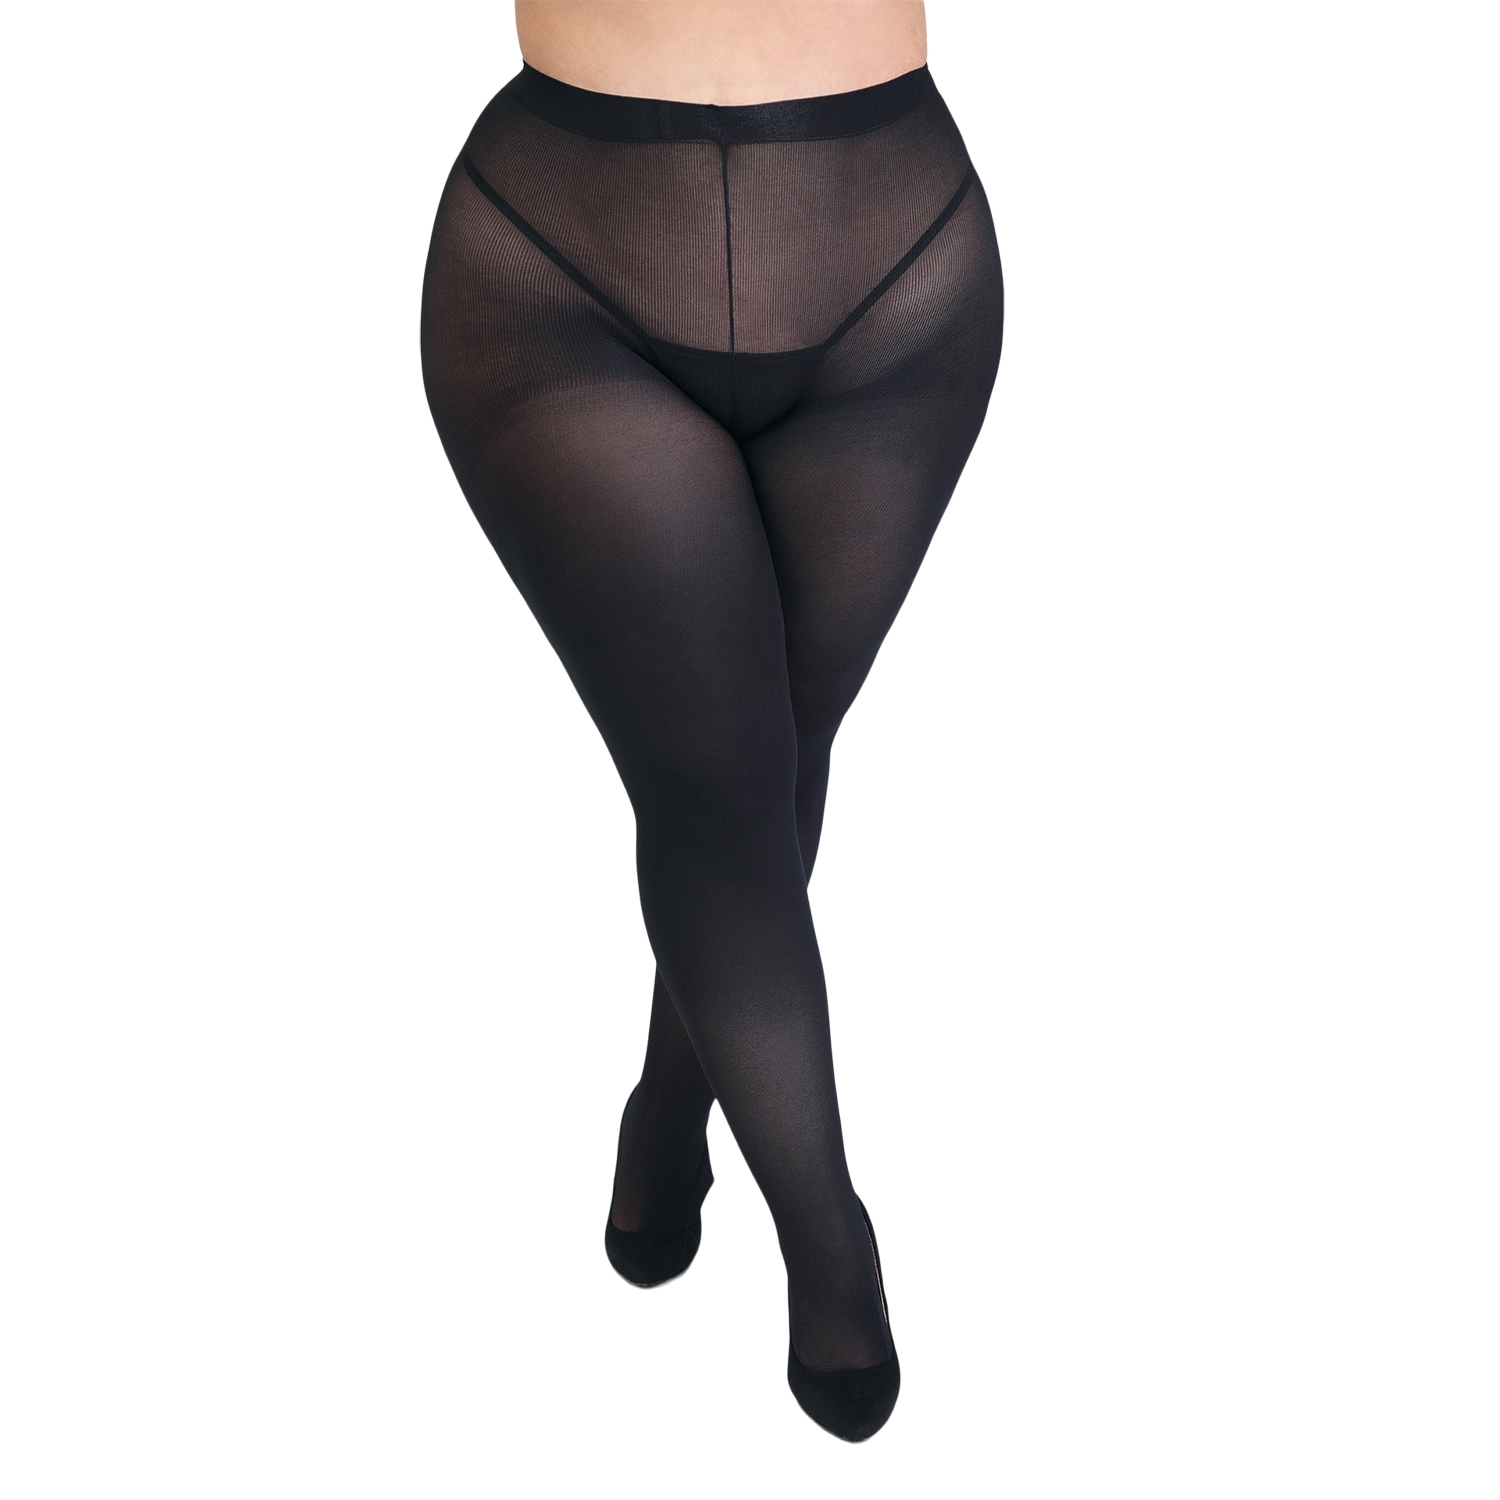 Fifty Shades Of Grey Captivate Plus Size Spanking Tights - Black - Plus size thumbnail